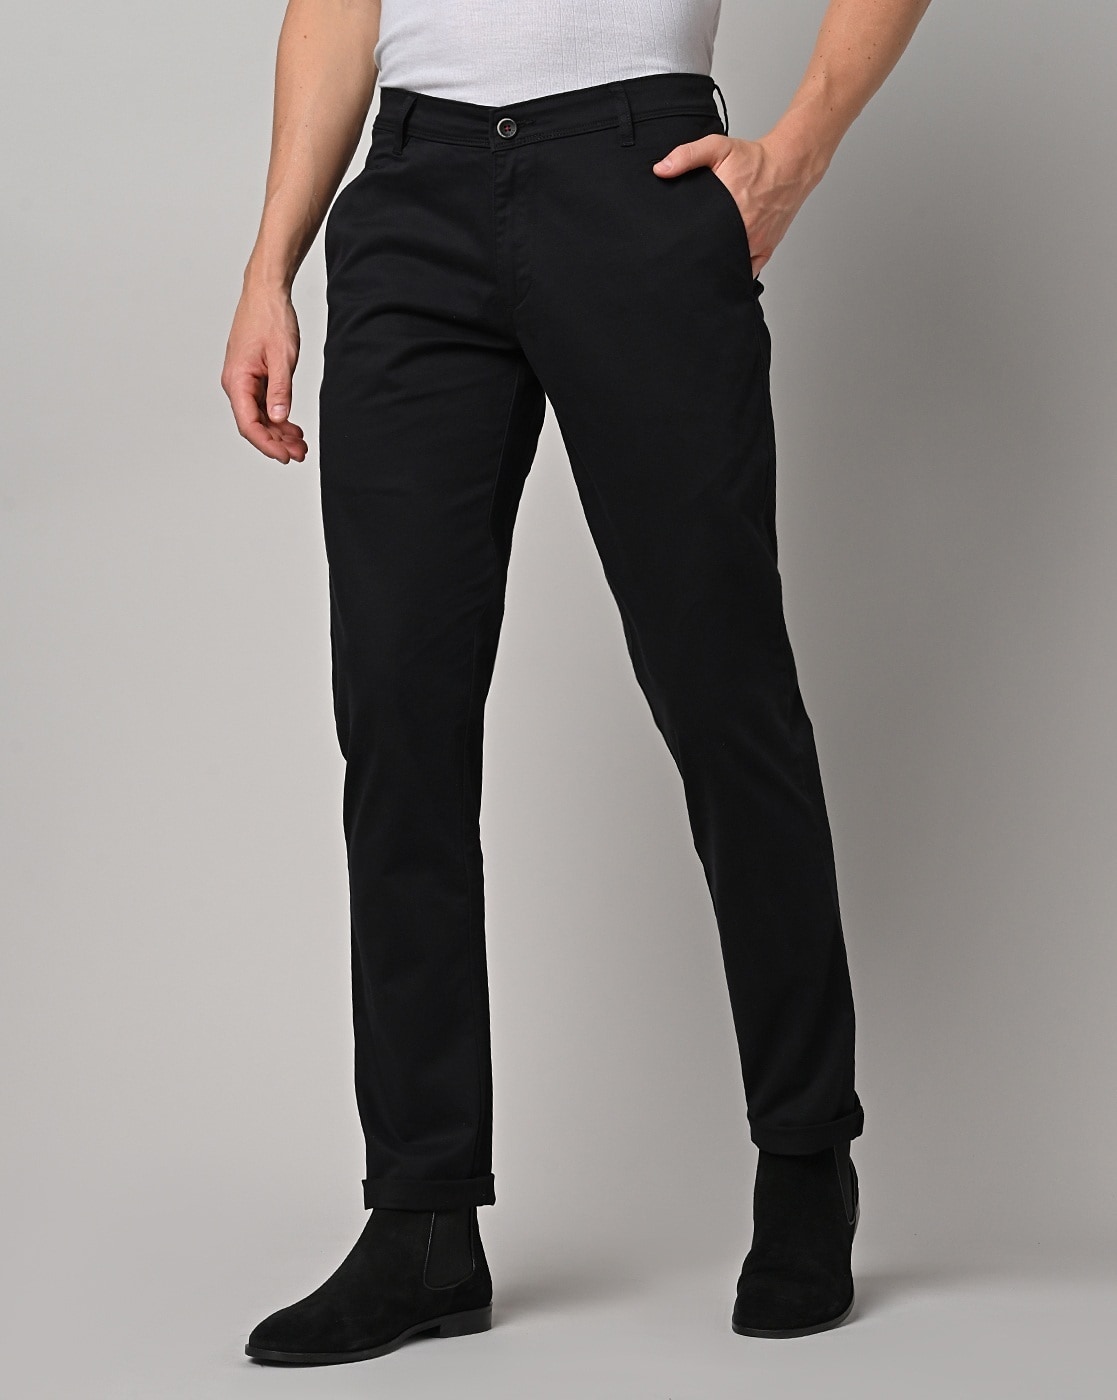 Buy Ketch Jet Black Chinos Trouser for Men Online at Rs.516 - Ketch